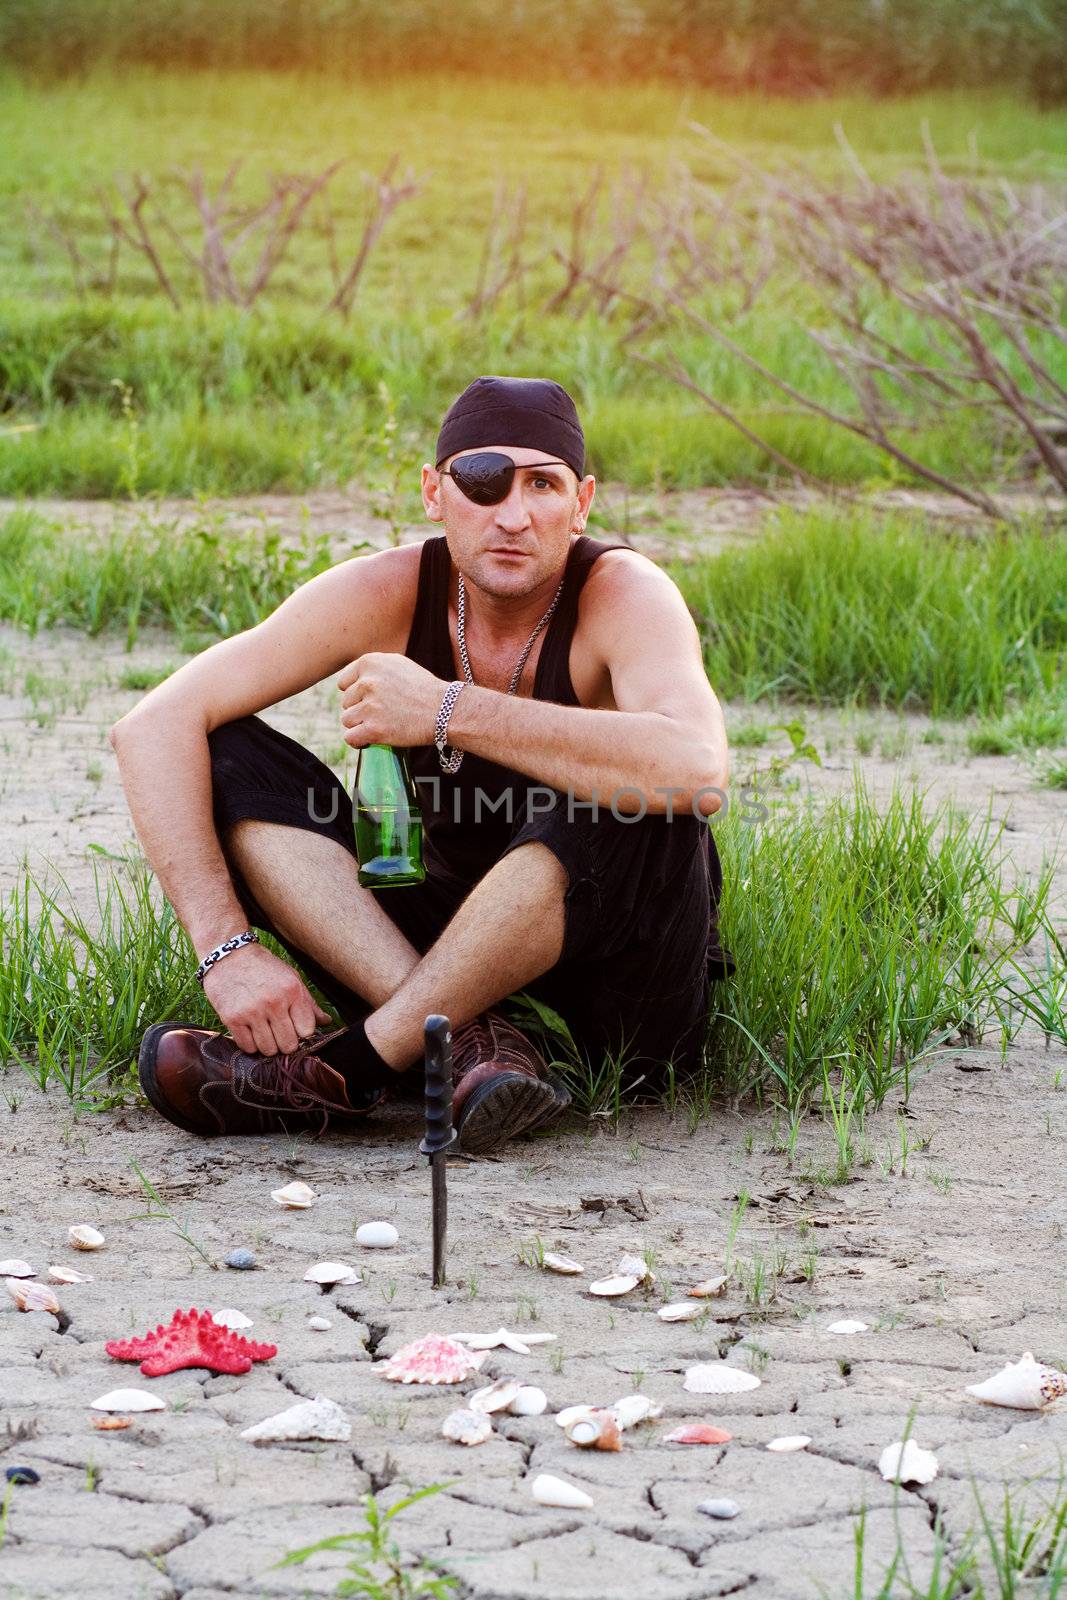 Pirate on land with a bottle of rum, threatening look